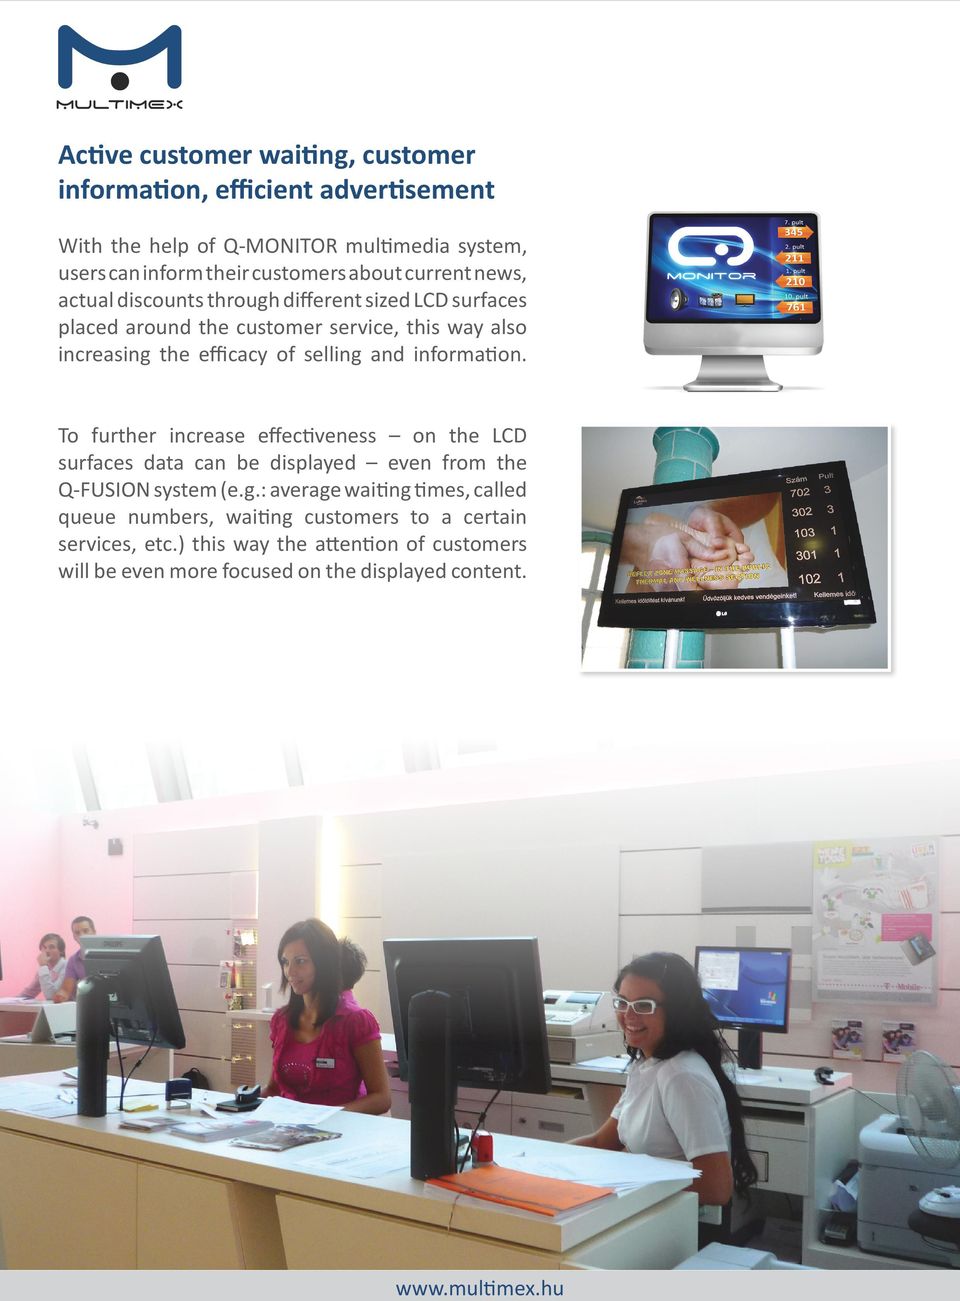 selling and information. To further increase effectiveness on the LCD surfaces data can be displayed even from the Q-FUSION system (e.g.: average waiting times, called queue numbers, waiting customers to a certain services, etc.